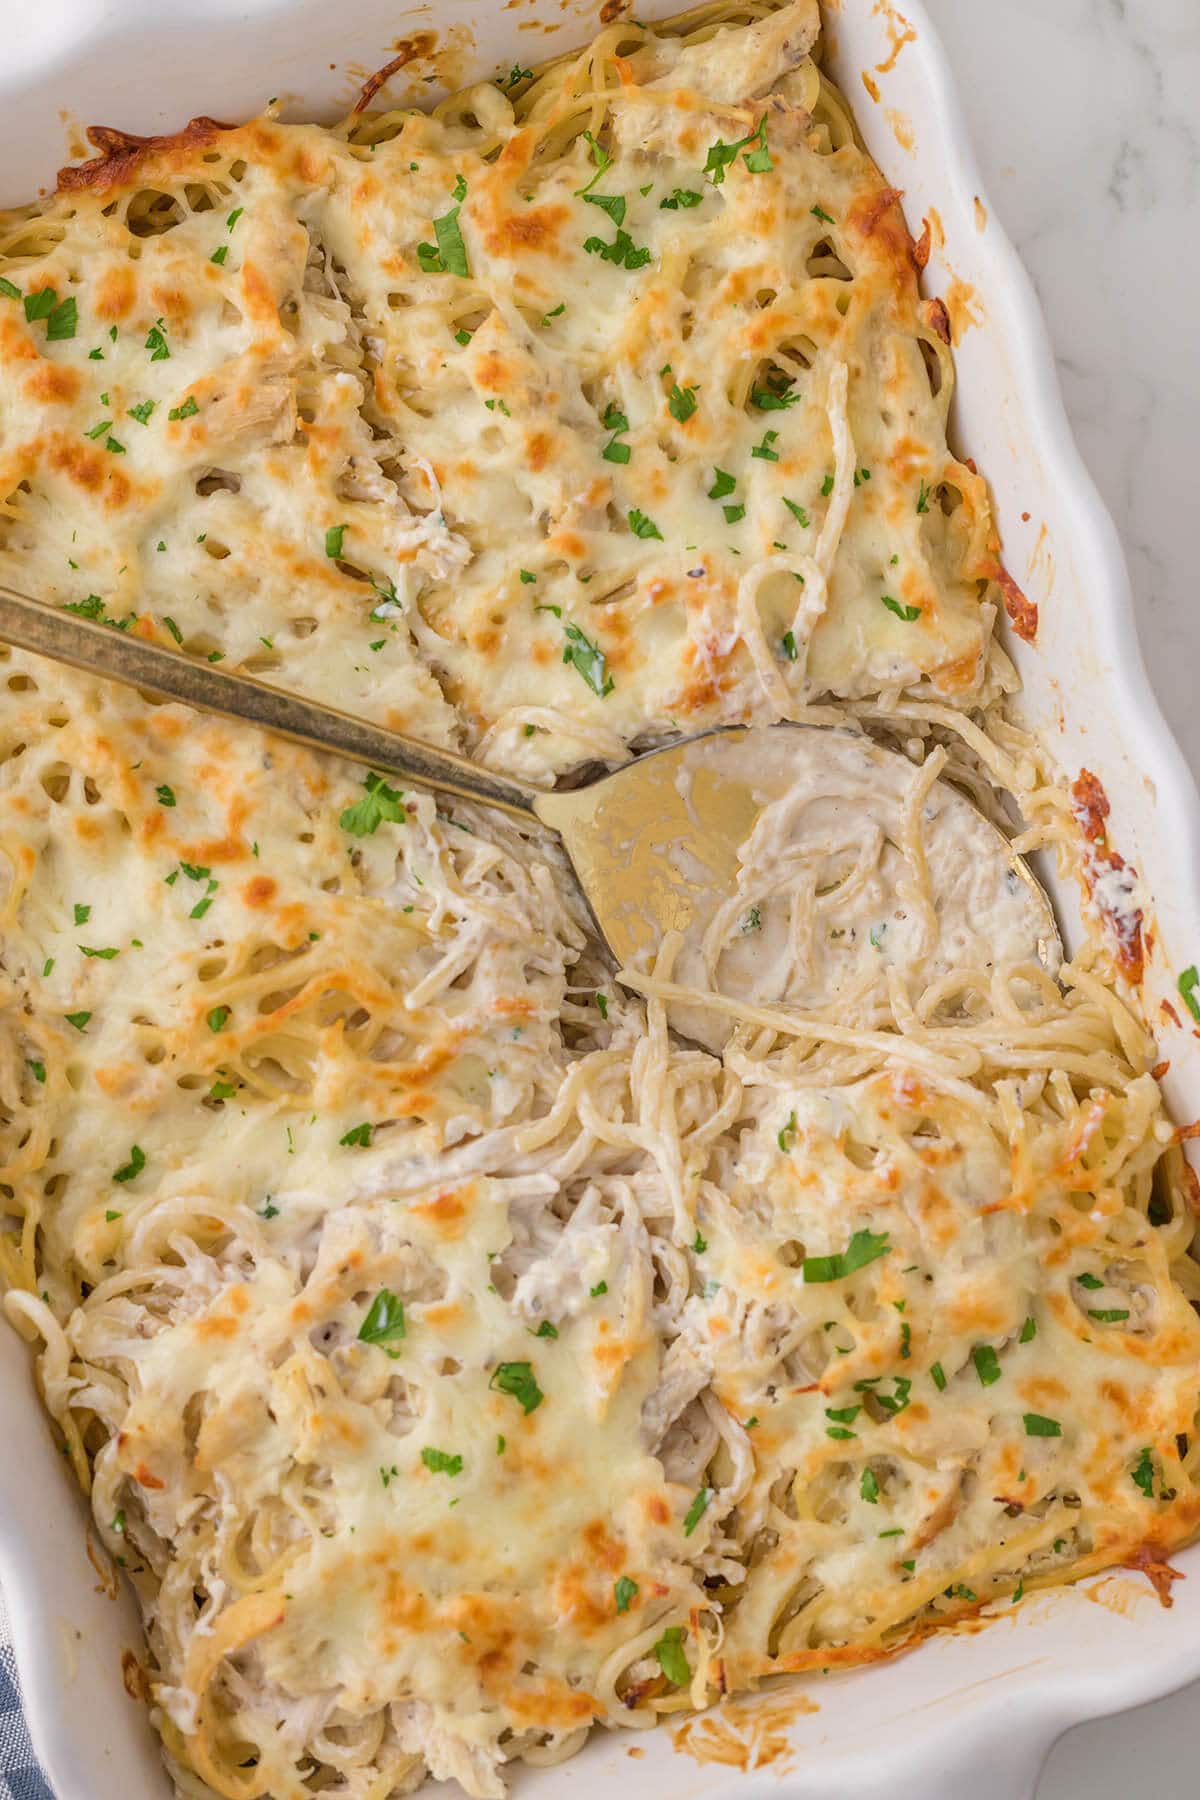 Baking dish filled with spaghetti casserole, with serving spoon.